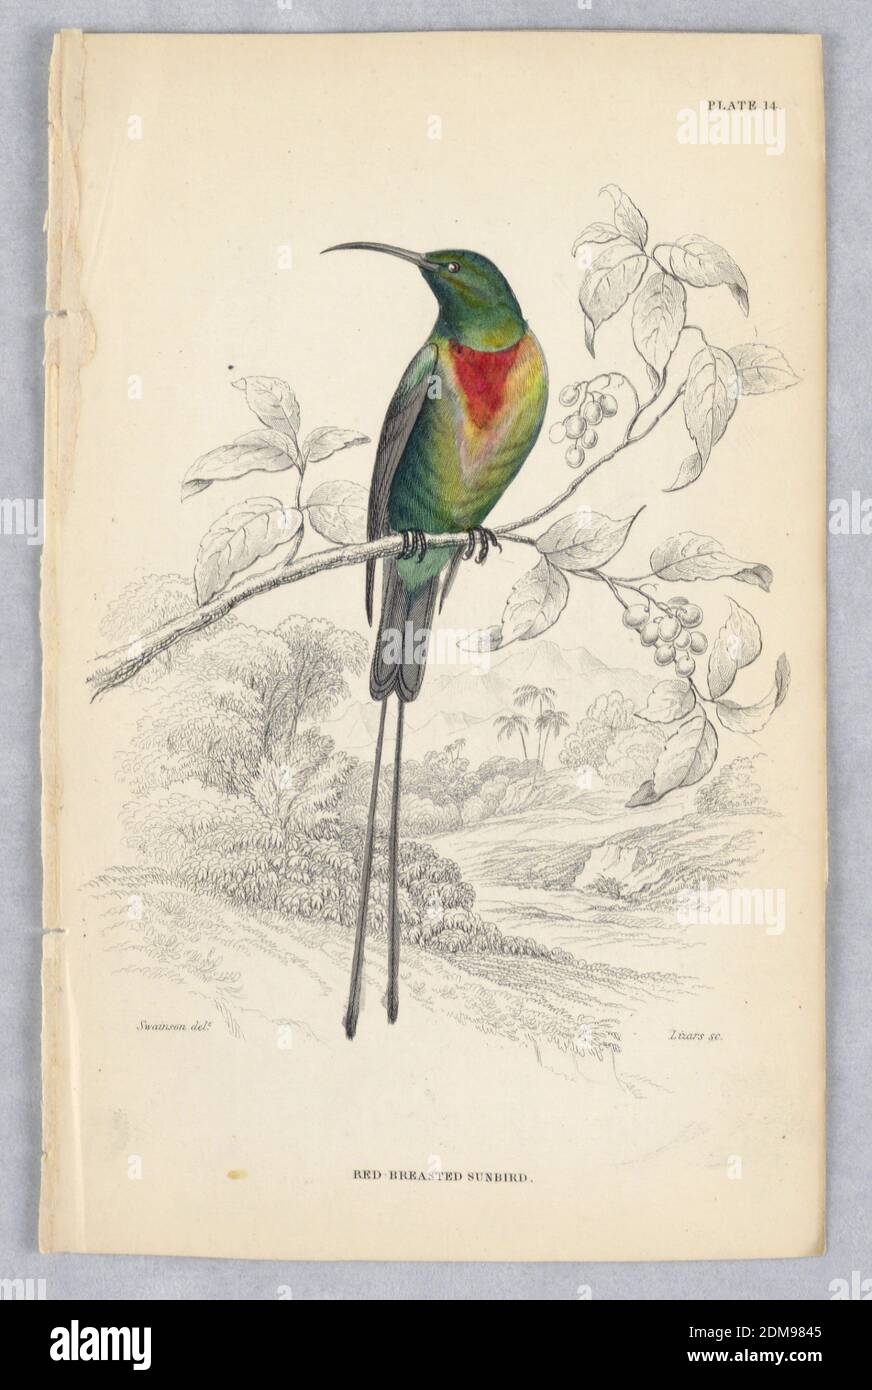 Red-breasted Sunbird, Plate 14 from Birds of Western Africa, William Home Lizars, Scottish, 1788 - 1859, William Swainson, British, 1789 - 1855, Engraving, brush and watercolor on paper, Green bird on a branch with fruit. Tropical background. He has gray wing and tail, including two long tail feathers. Red and yellow patch at throat. Title and artists' names below., Edinburgh, Scotland, 1837, Print Stock Photo